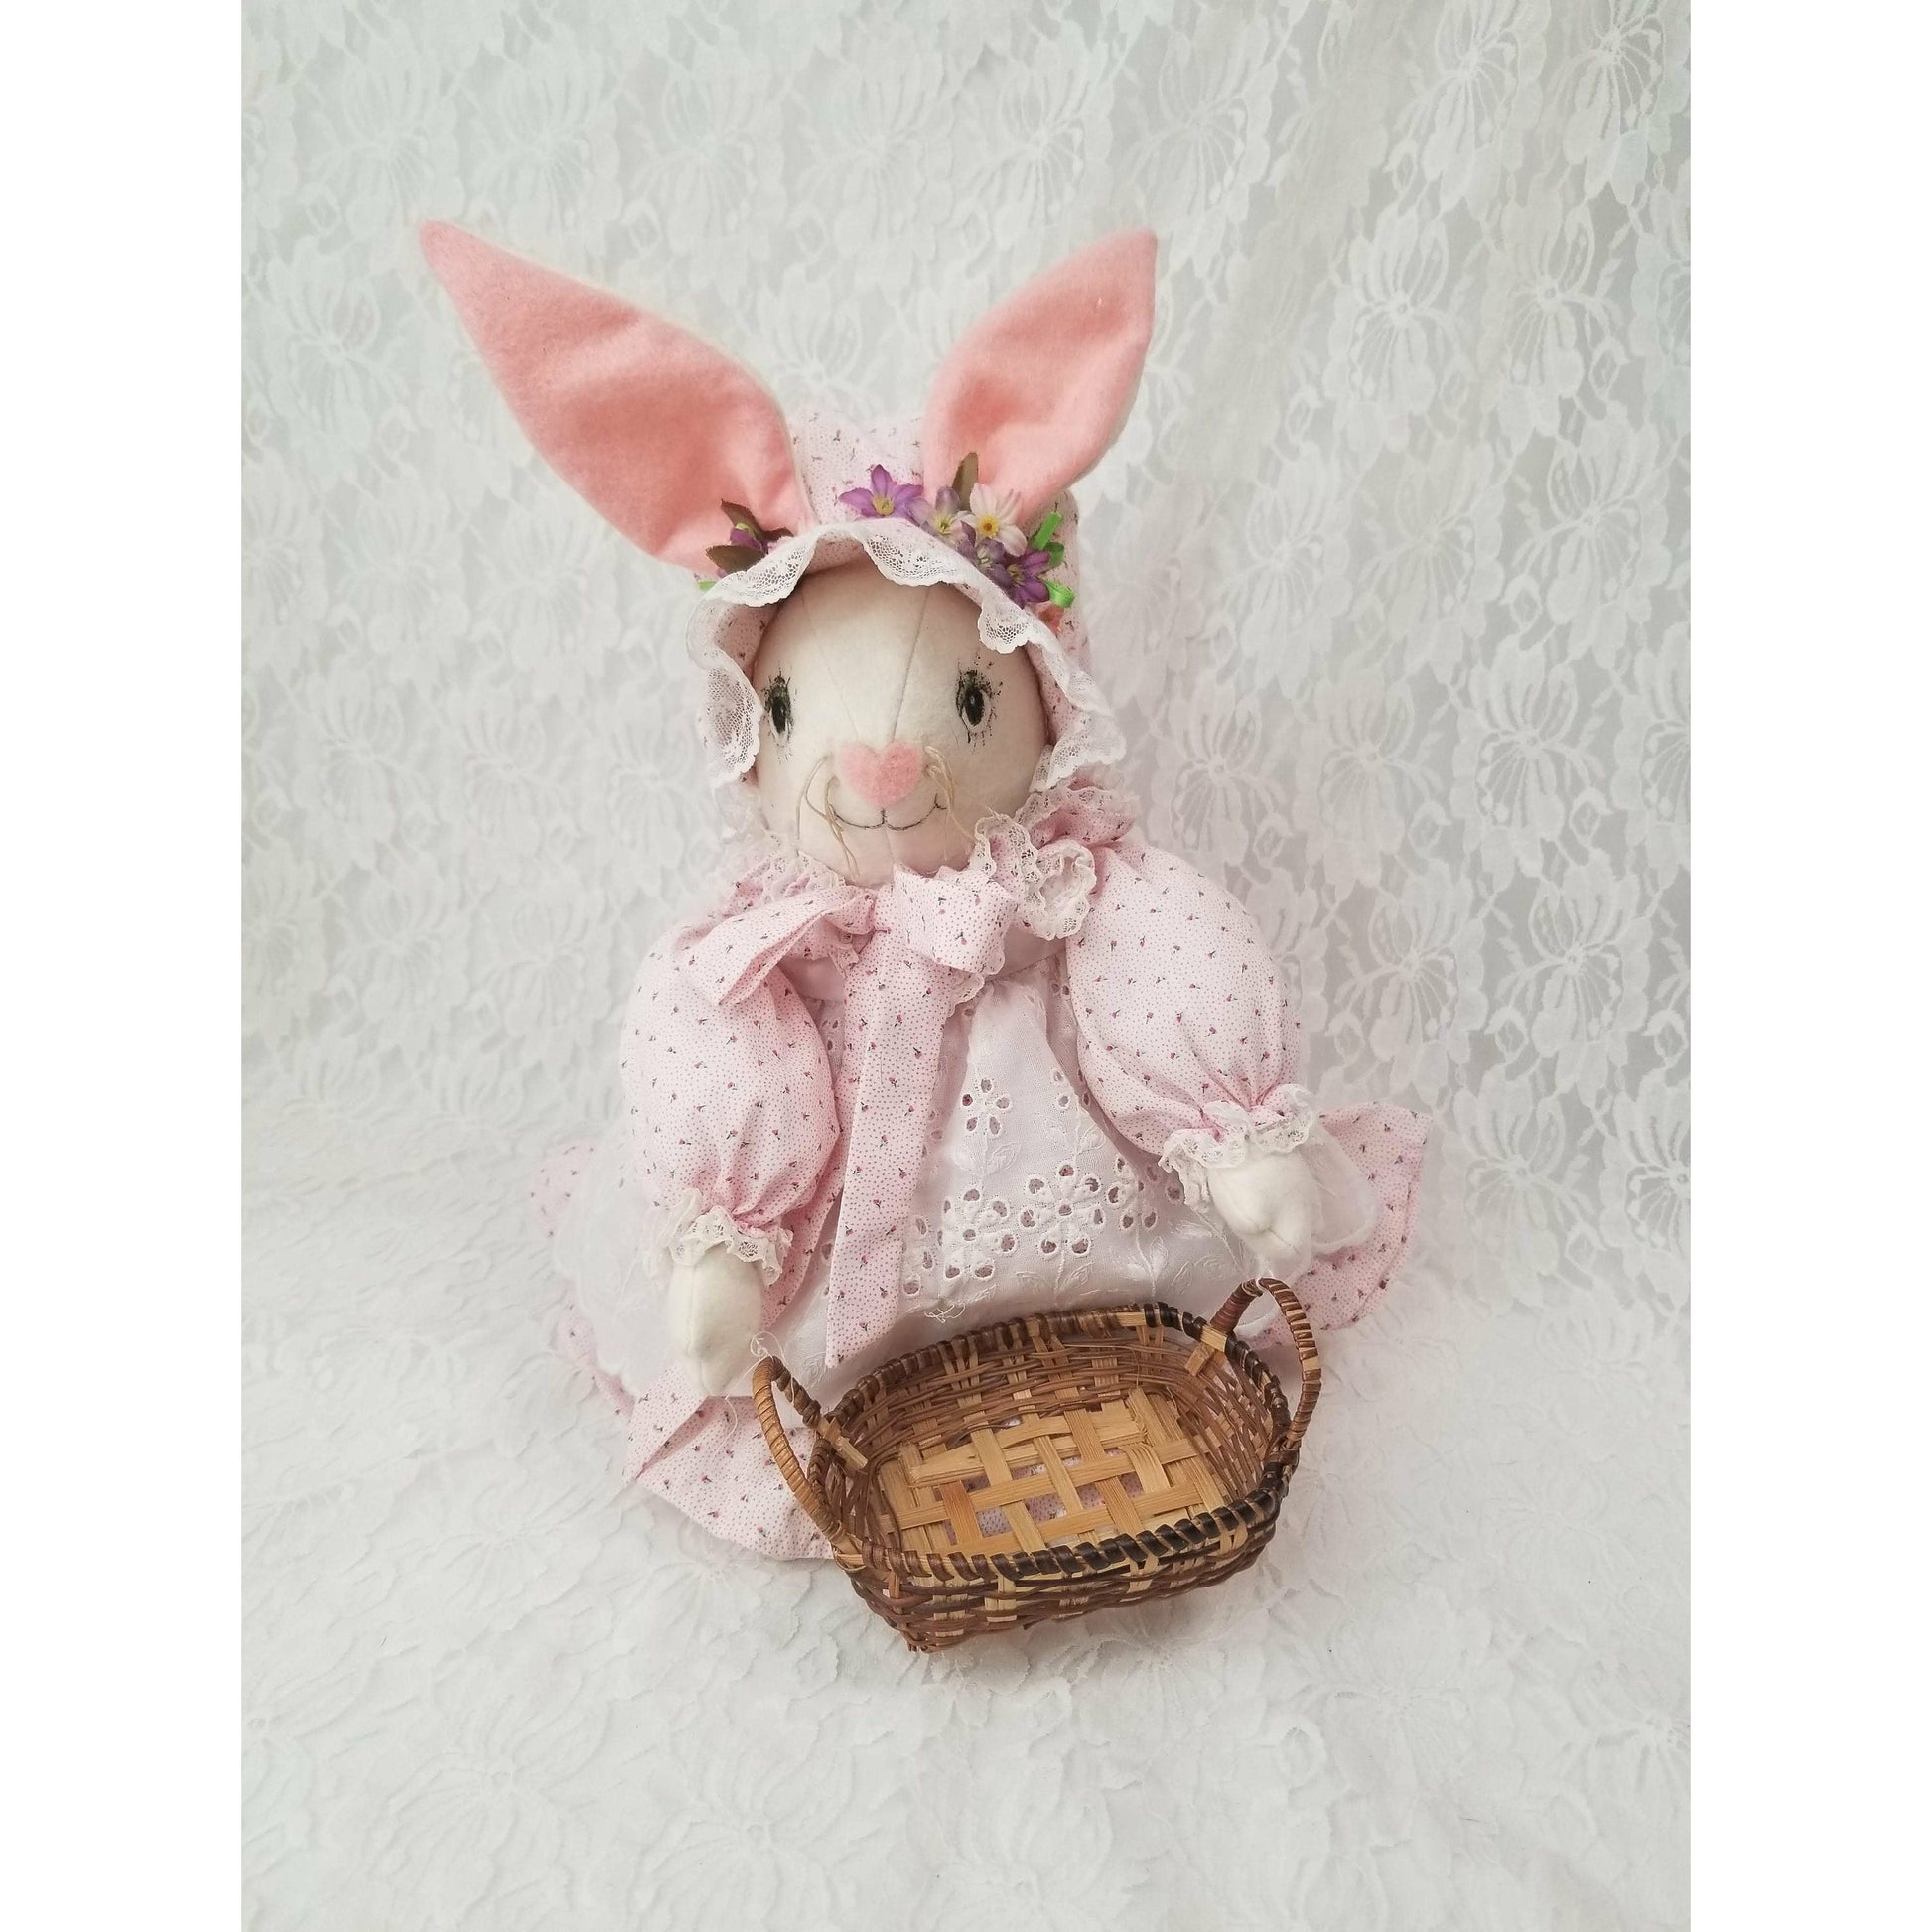 Bunny Rabbit Hare Girl Doll ~ Handmade Vintage 1980s 16" OOAK Cloth ~ Carrying a Wicker Basket ~ Textile Rag Doll